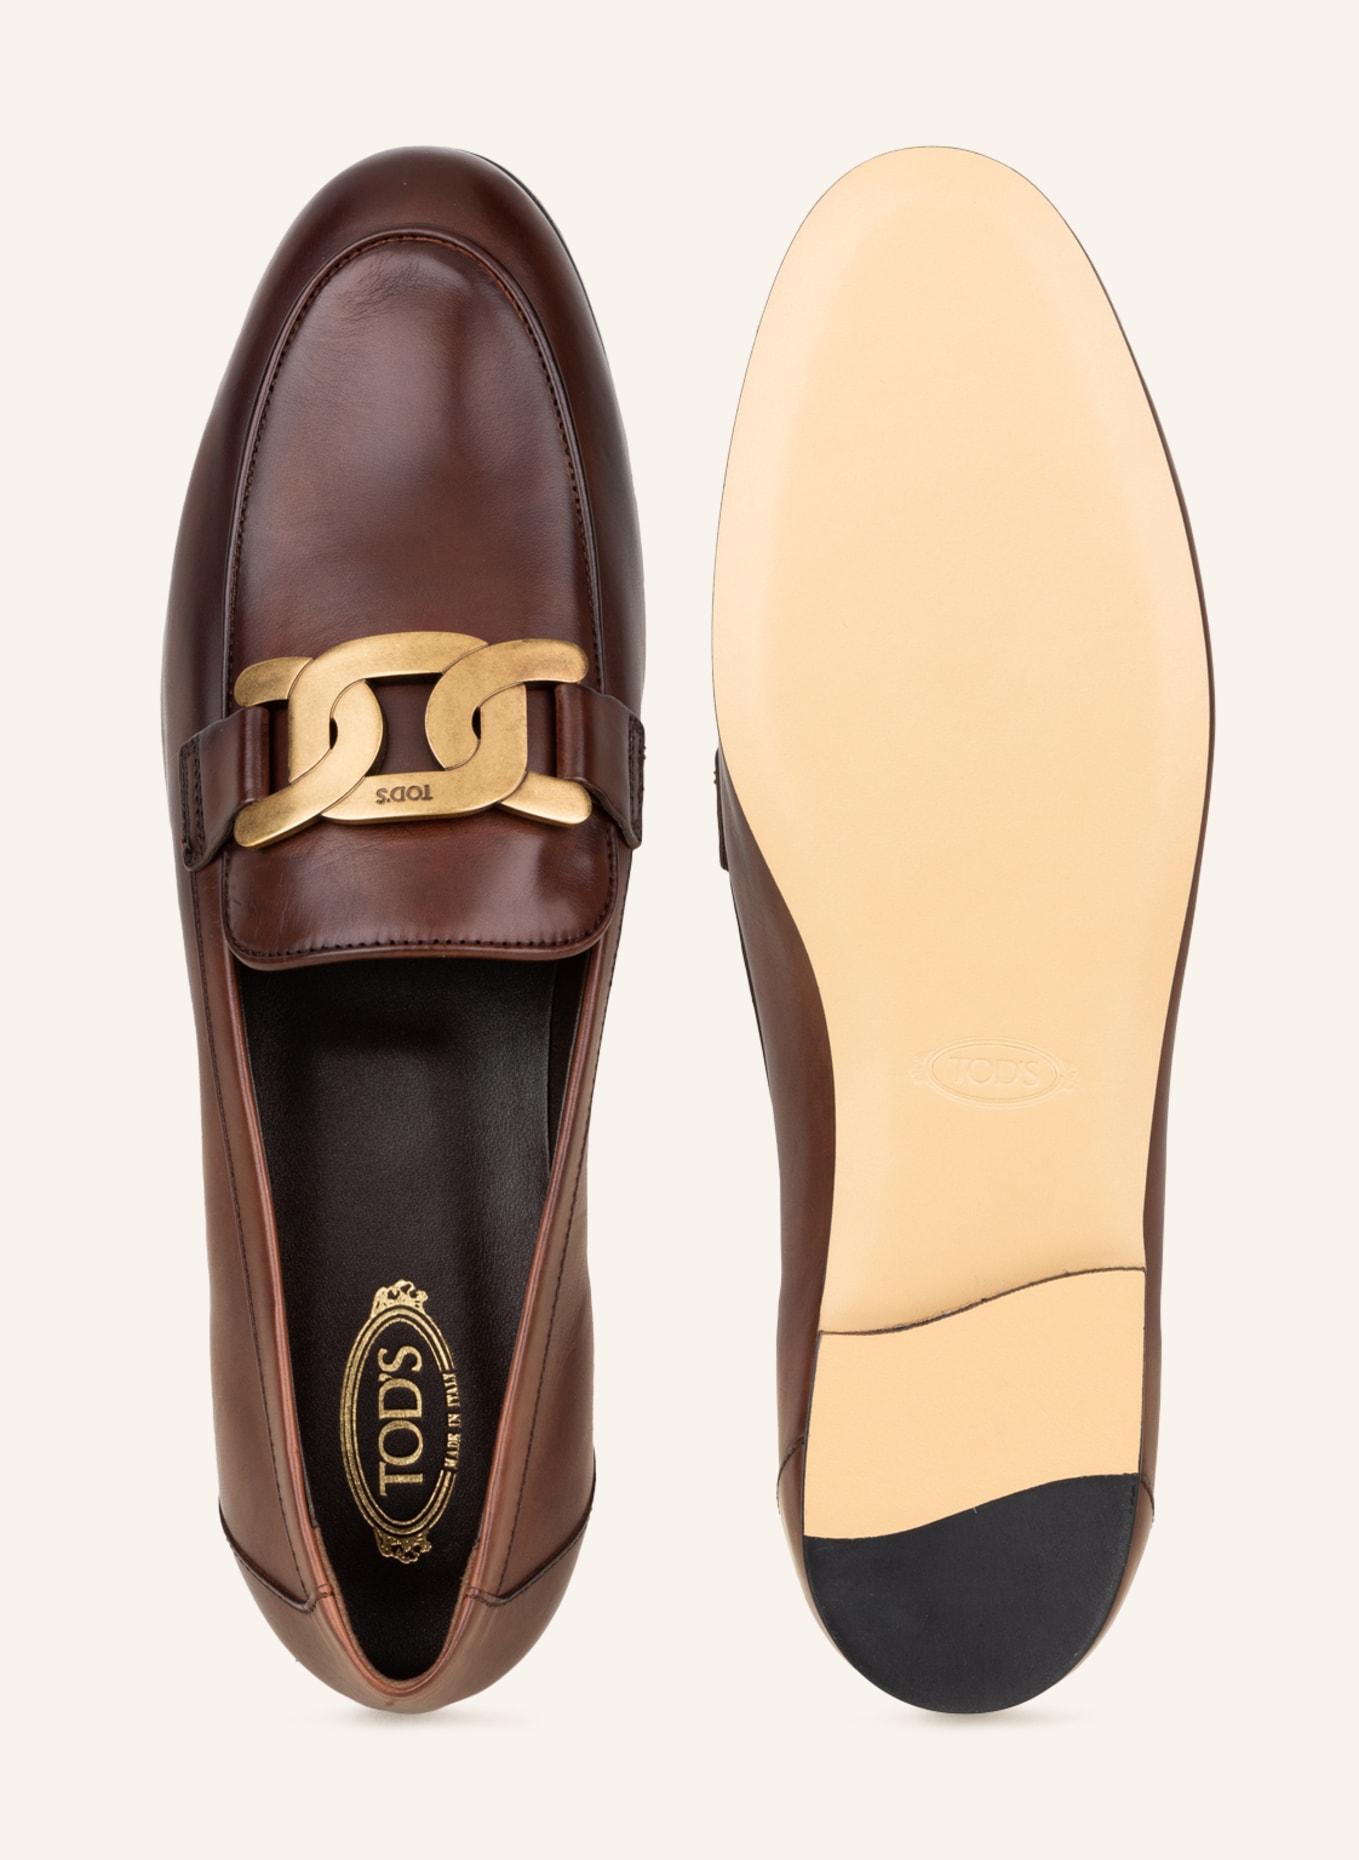 TOD'S Loafers, Color: DARK BROWN (Image 5)